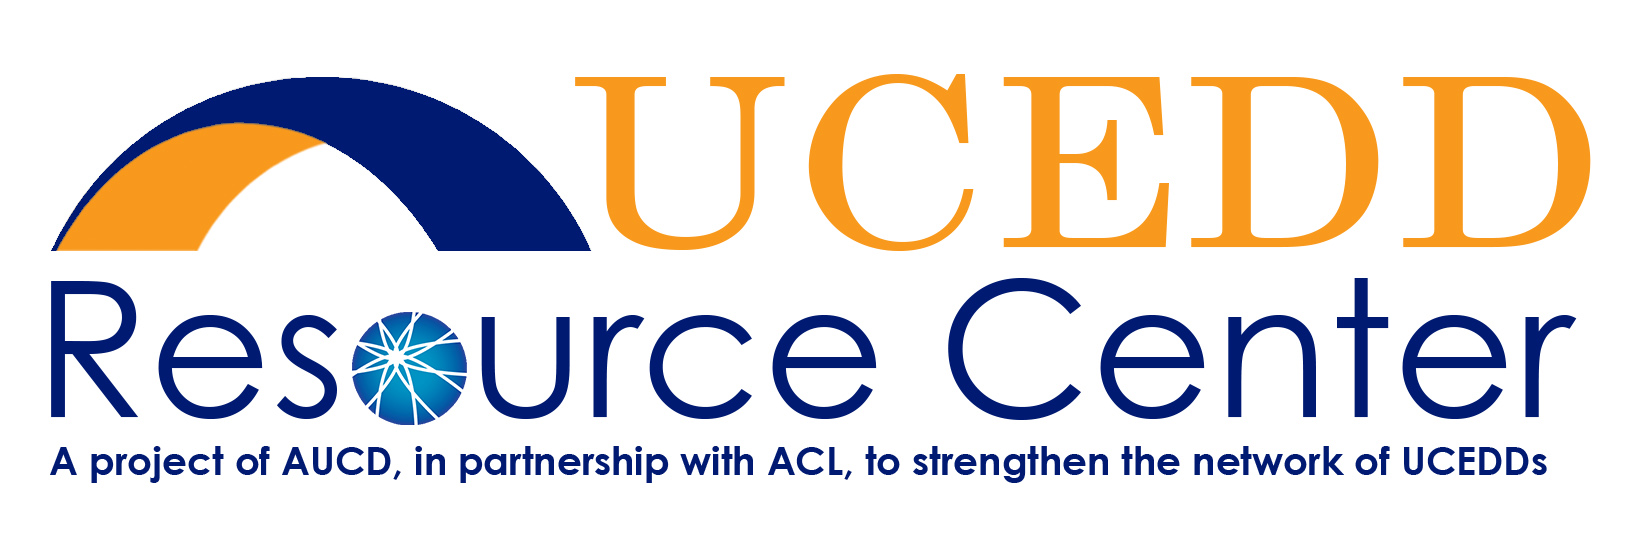 The logo for the UCEDD Resource Center: A project of AUCD, in partnership with ACL, the strengthen the network of UCEDDs